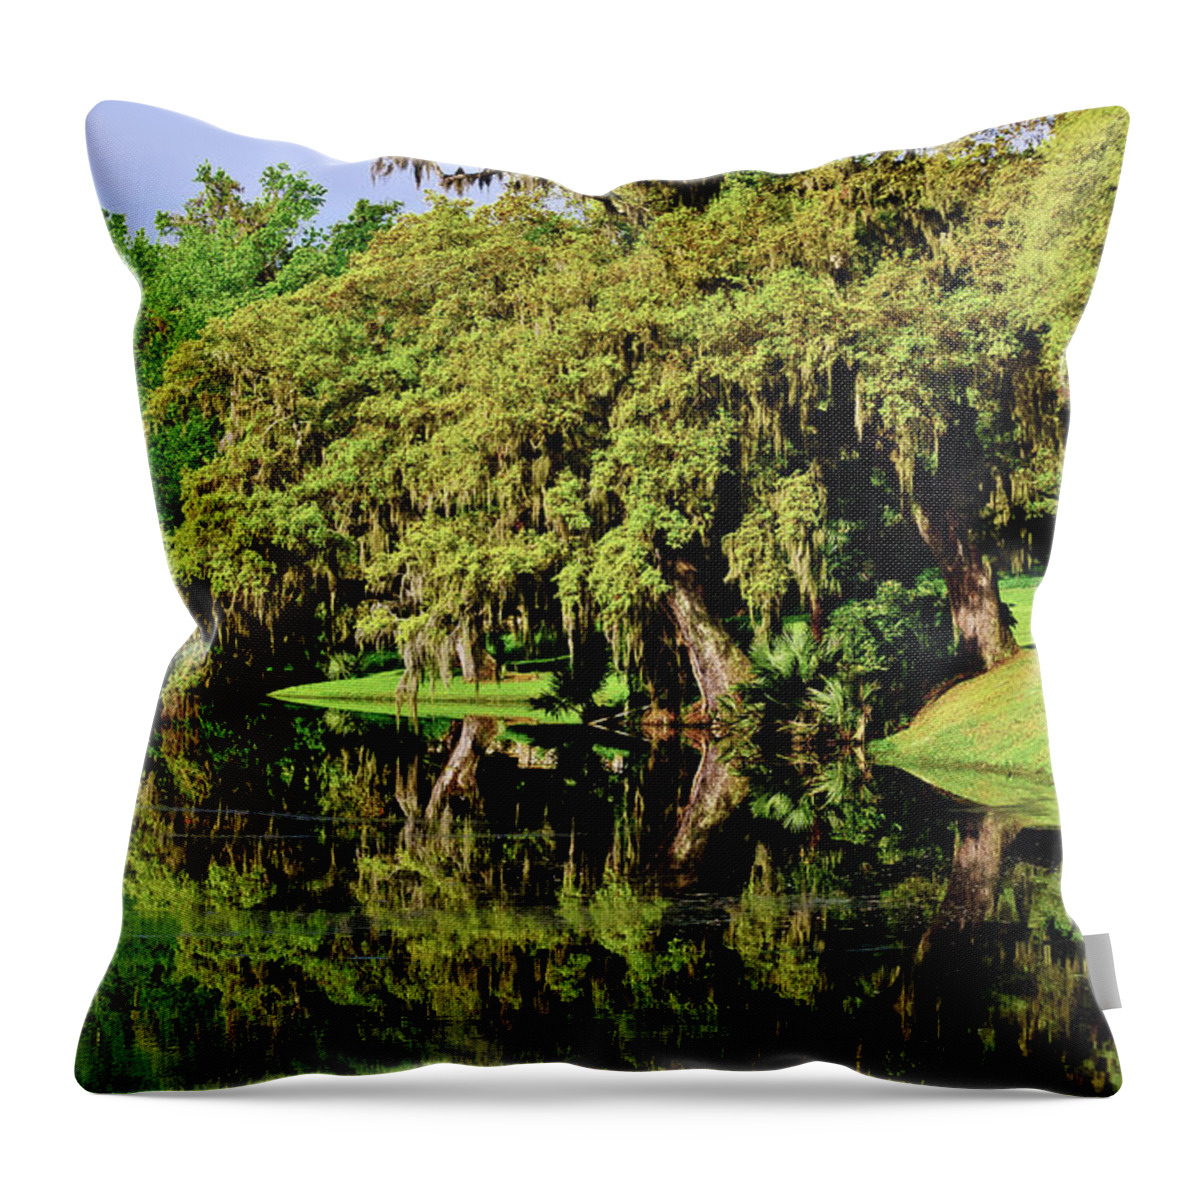 Ashley River Throw Pillow featuring the photograph The Ashley River by Louis Dallara